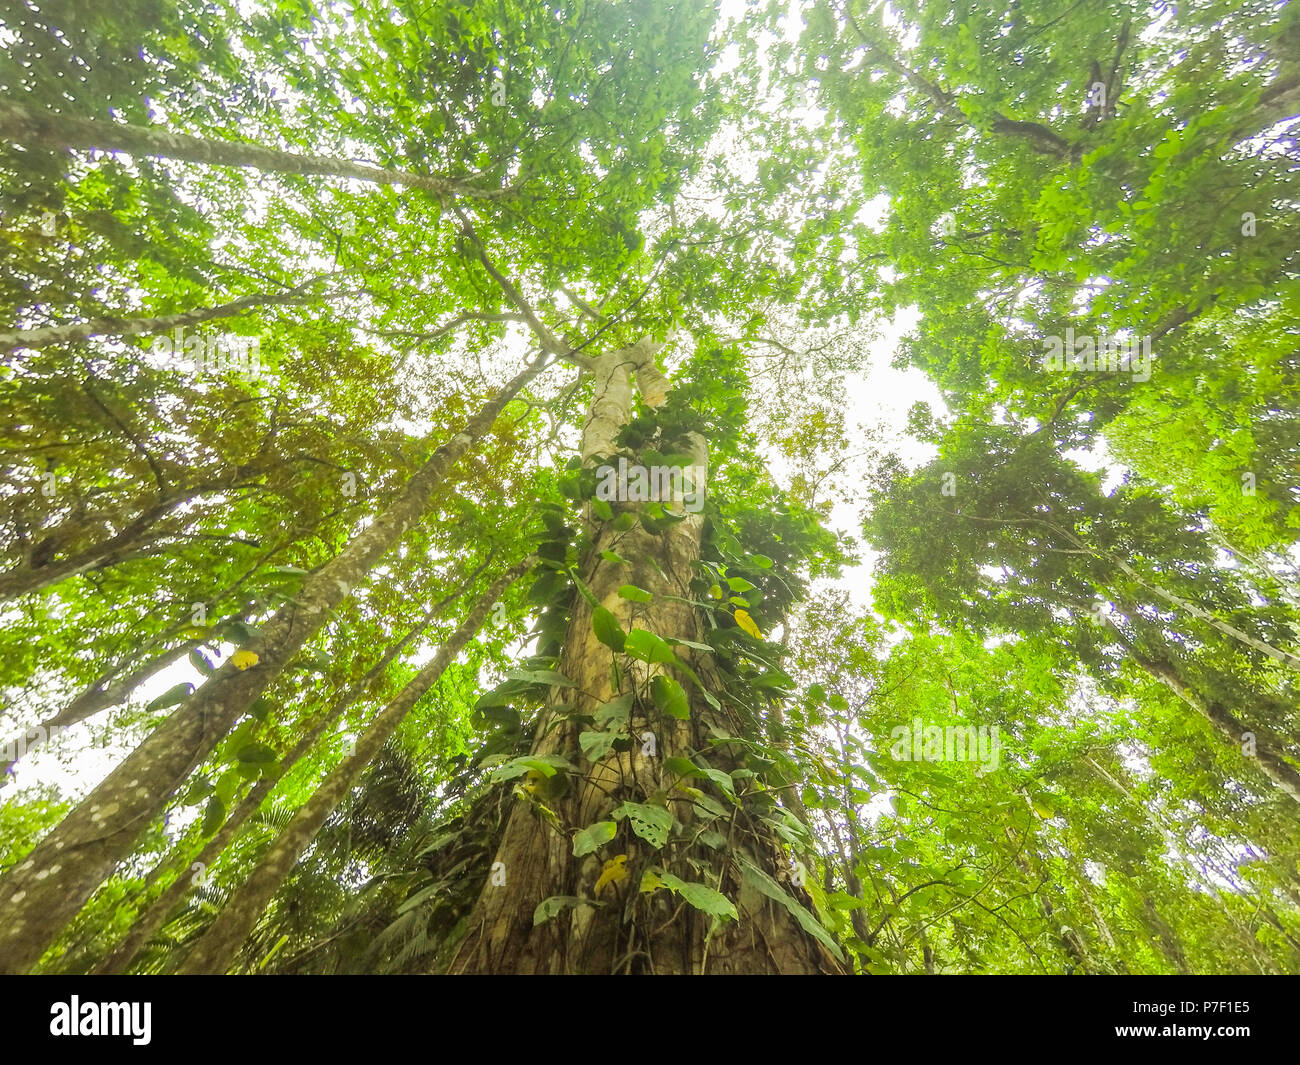 looking up inside tropical  rainforest / jungle  forest, Stock Photo